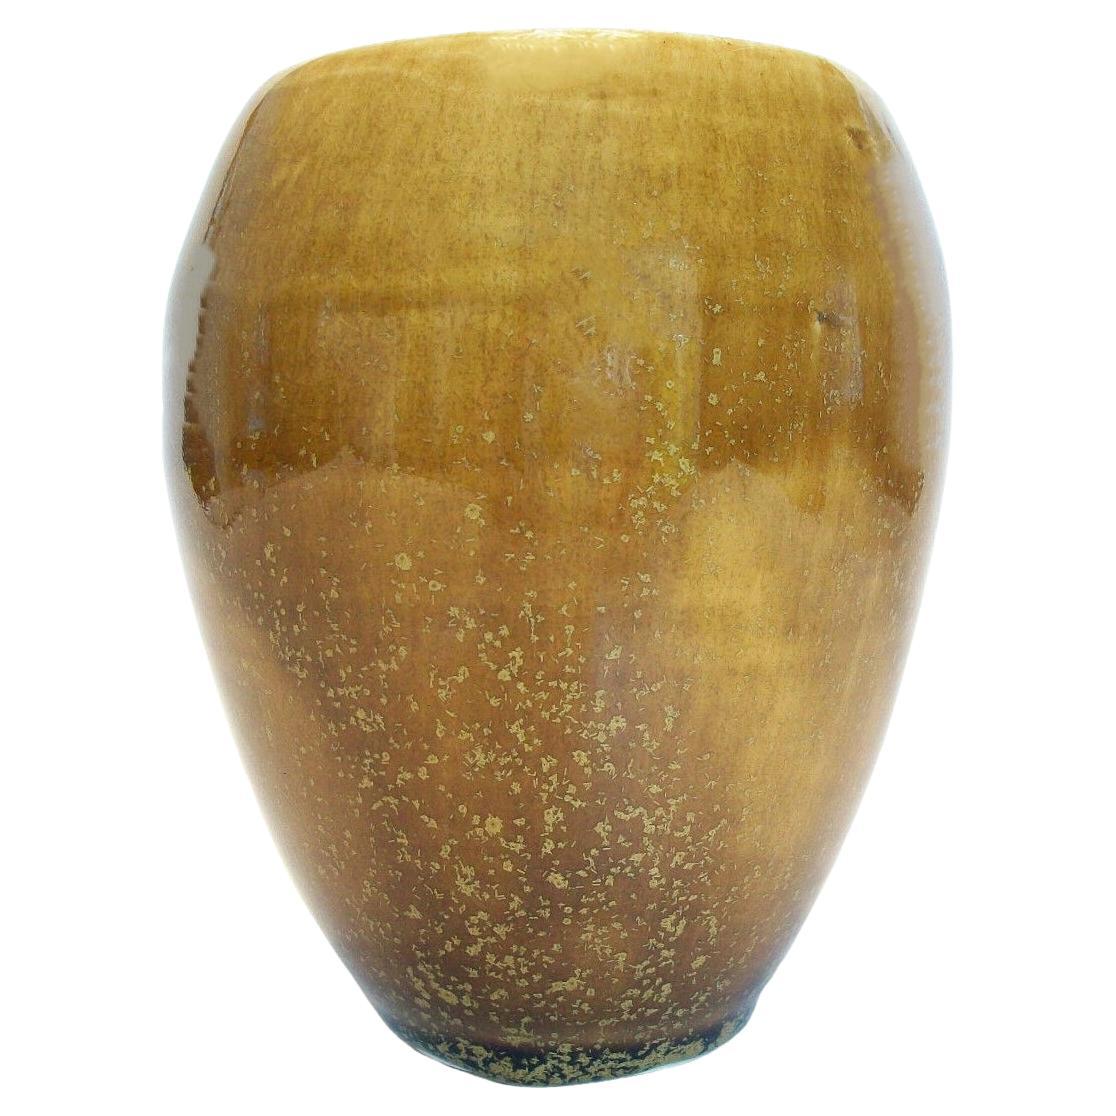 Vintage Glazed/Thrown Studio Pottery Vase - Signed - Canada - Late 20th Century For Sale